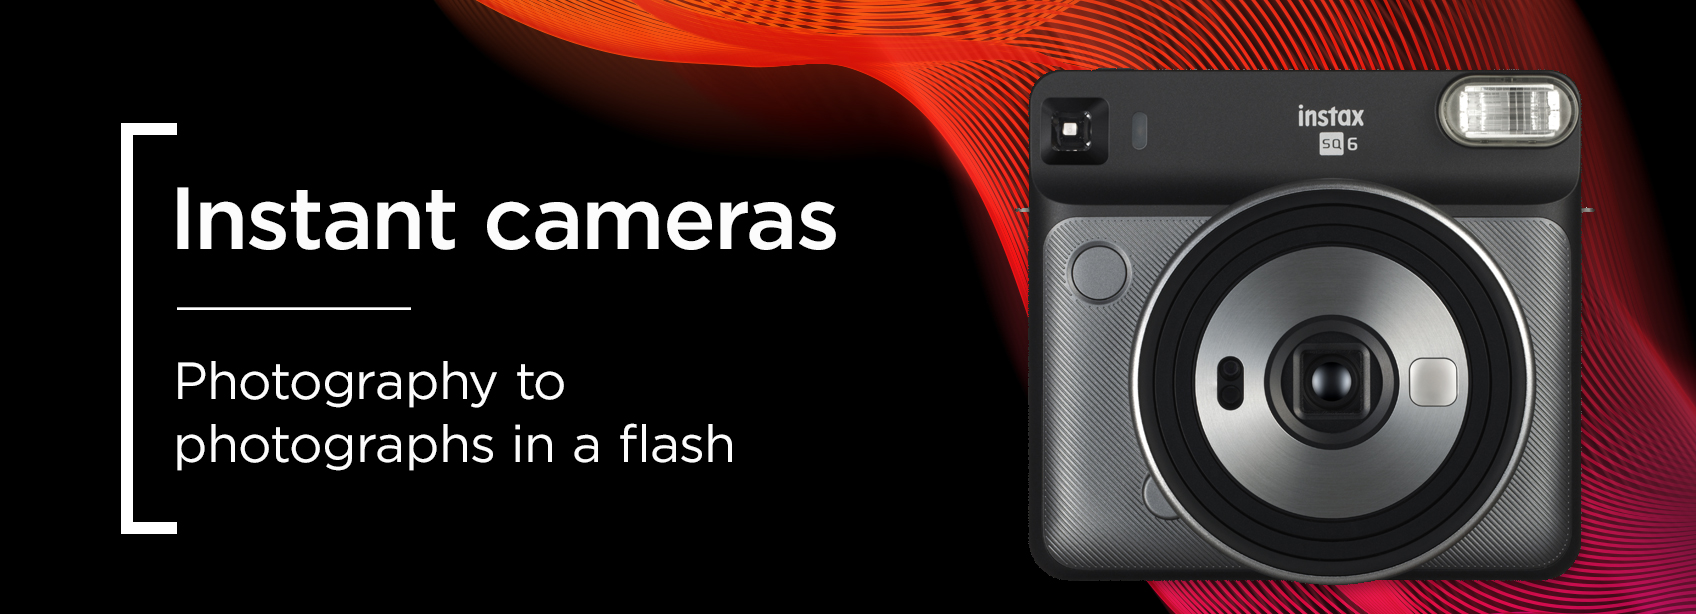 Instant cameras - Photography to photographs in a flash